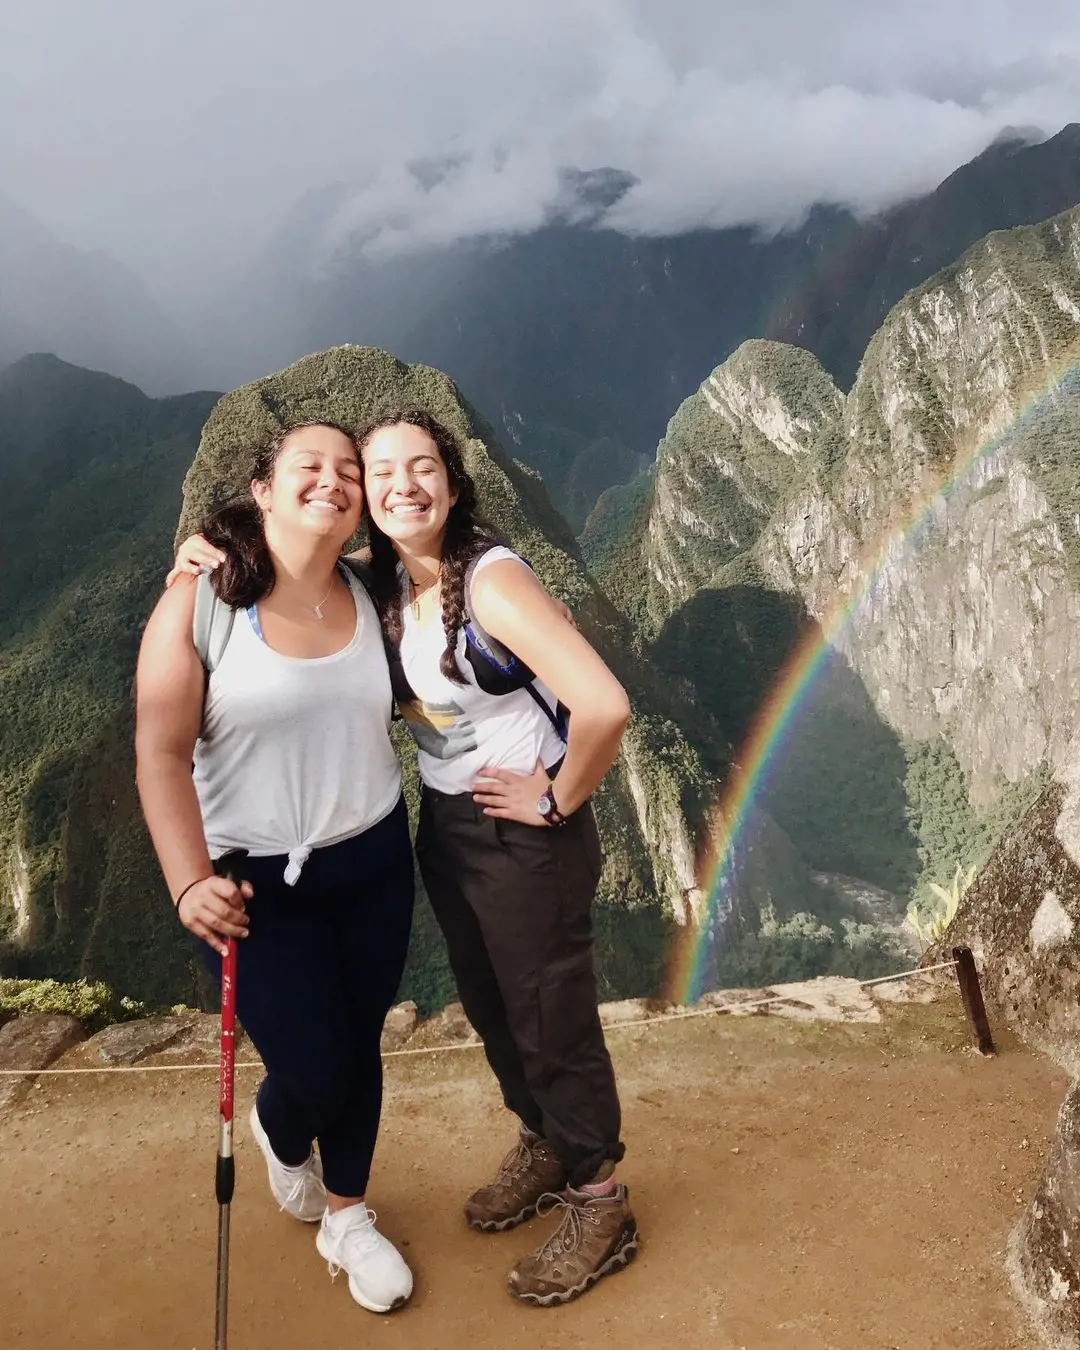 Elle wished Lily on her birthday by posting a picture from their trip to Peru.